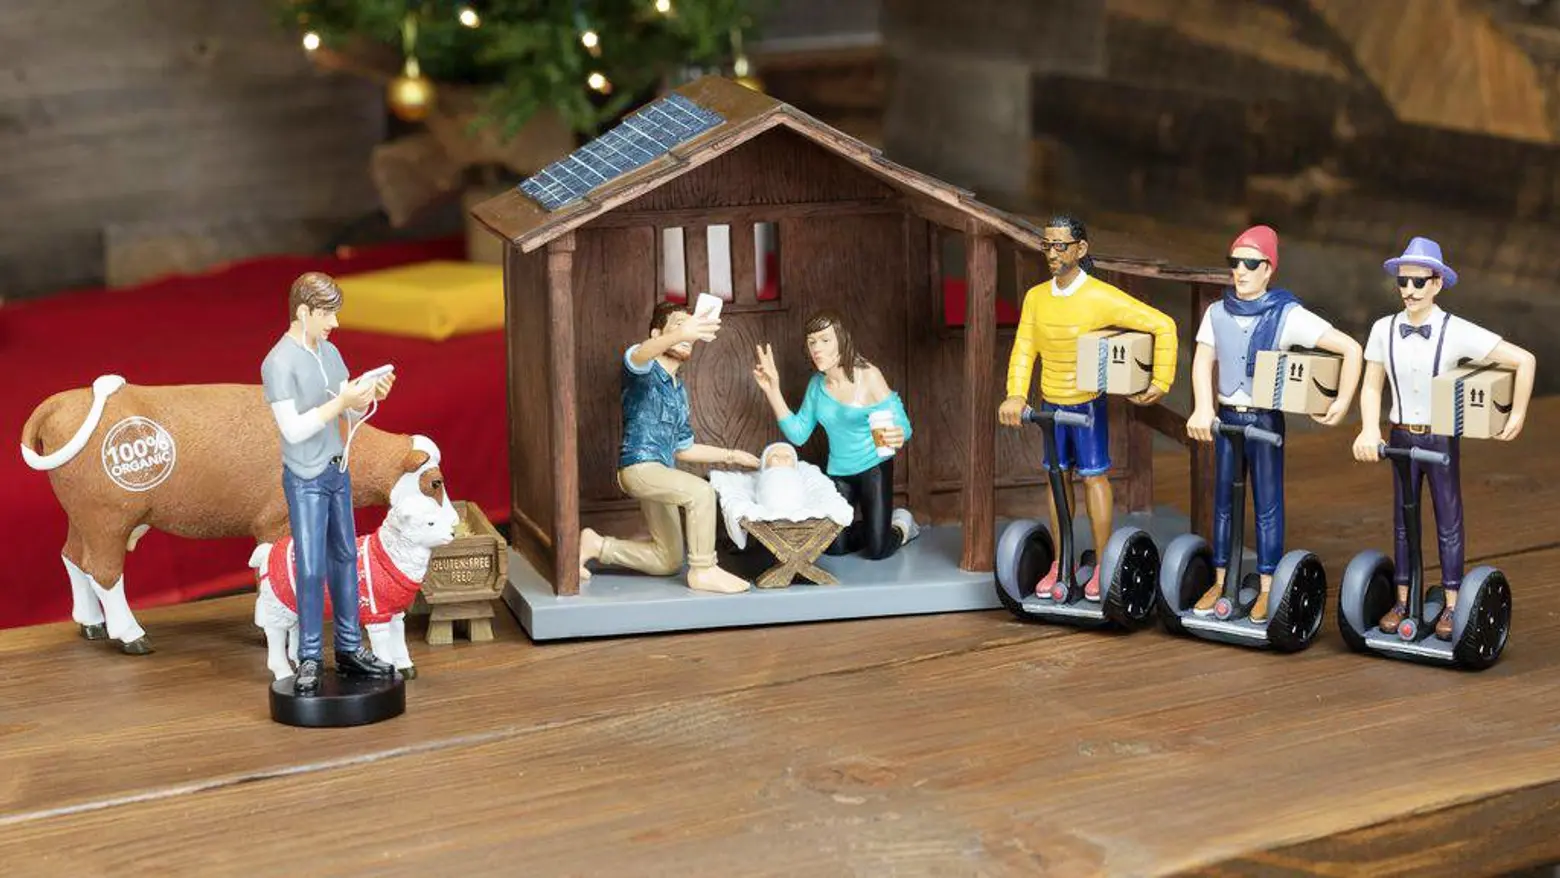 Hipster nativity scene is hilarious, sacrilegious and can be yours for $129.99